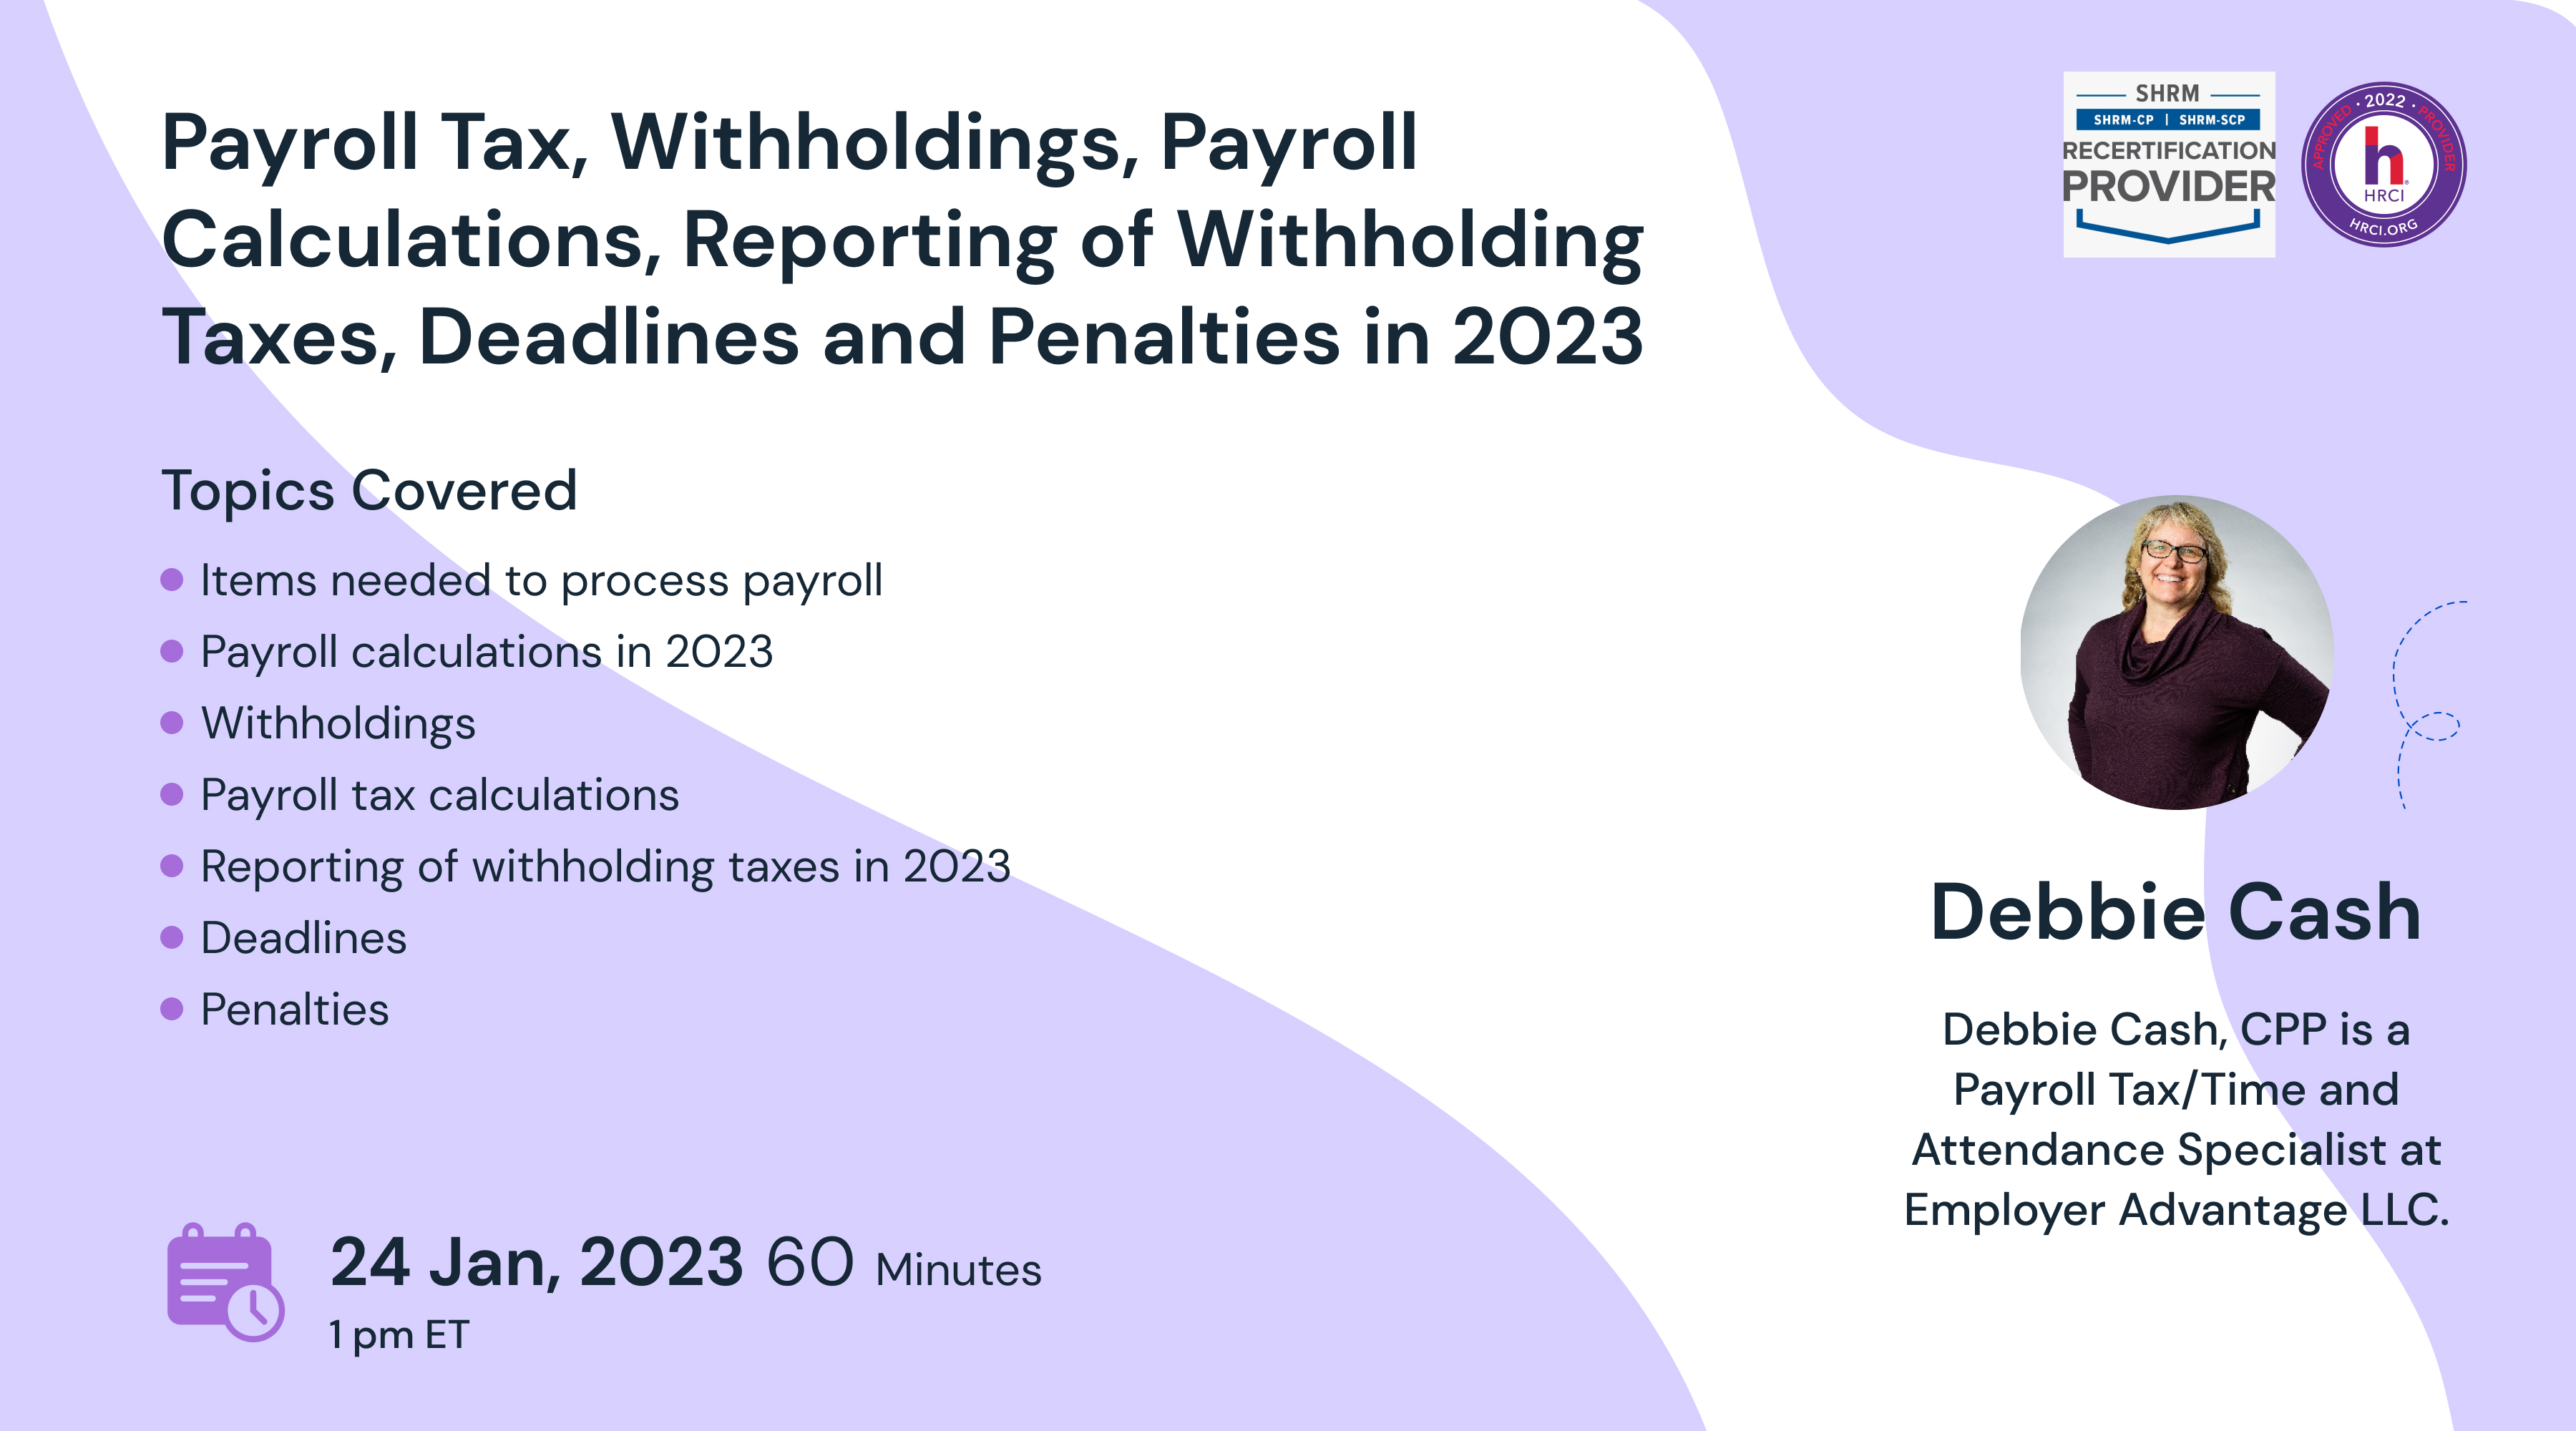 Payroll Tax, Withholdings, Payroll Calculations, Reporting of Withholding Taxes, Deadlines and Penalties in 2023